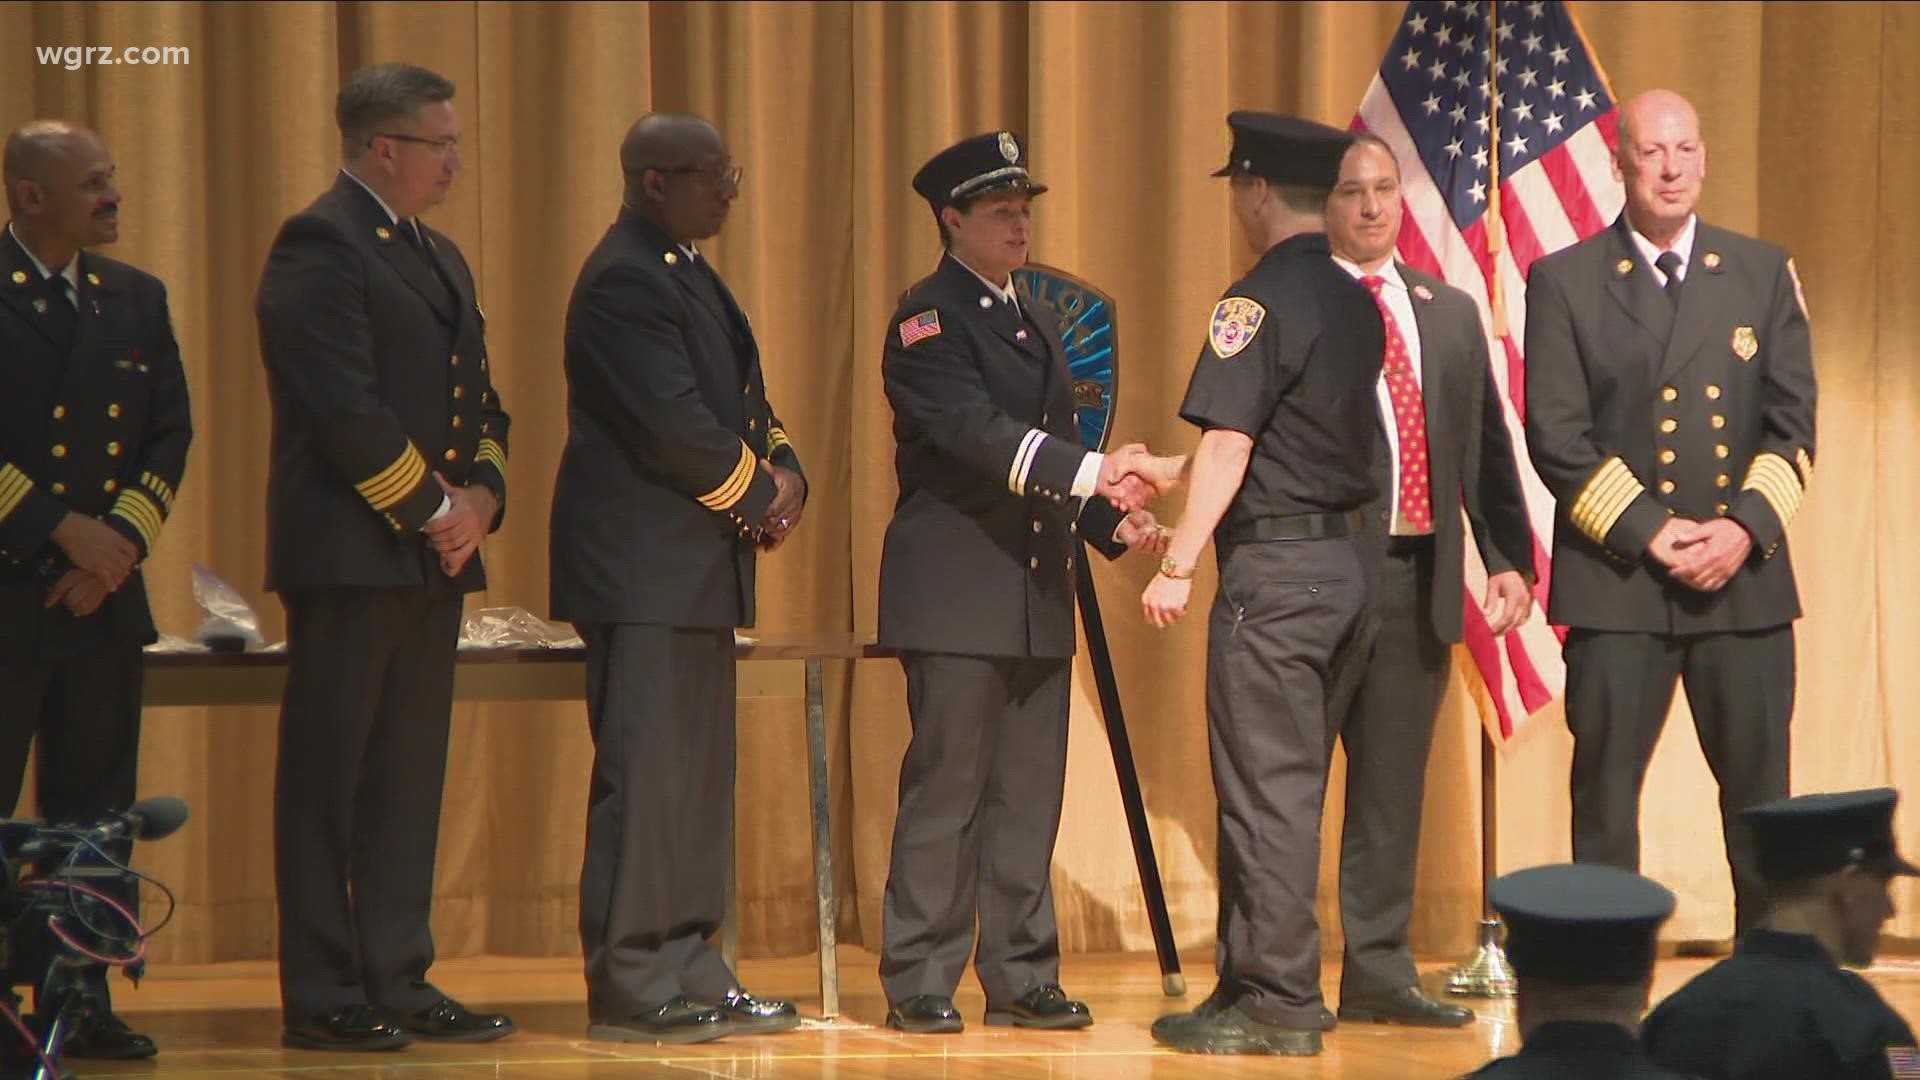 The Buffalo Fire Department welcomes 43 new firefighters. A graduation ceremony was held following 20 weeks of fire academy training.